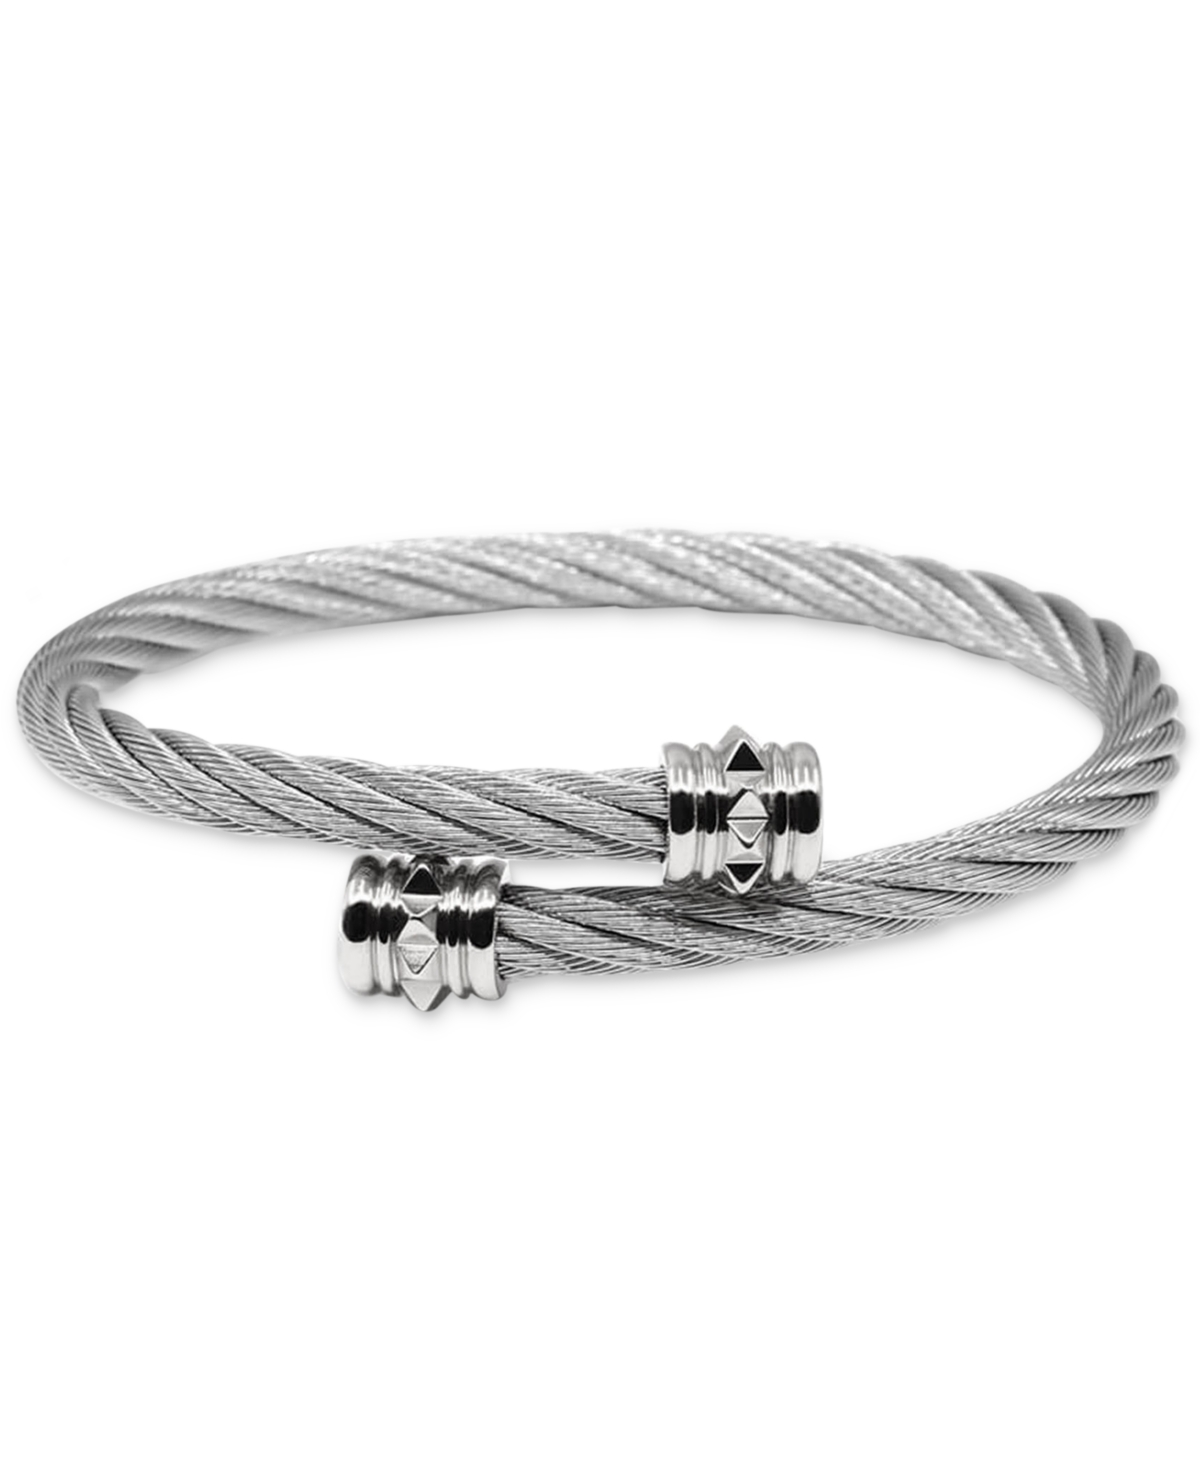 Charriol Capped Bypass Bracelet In Stainless Steel In Silver